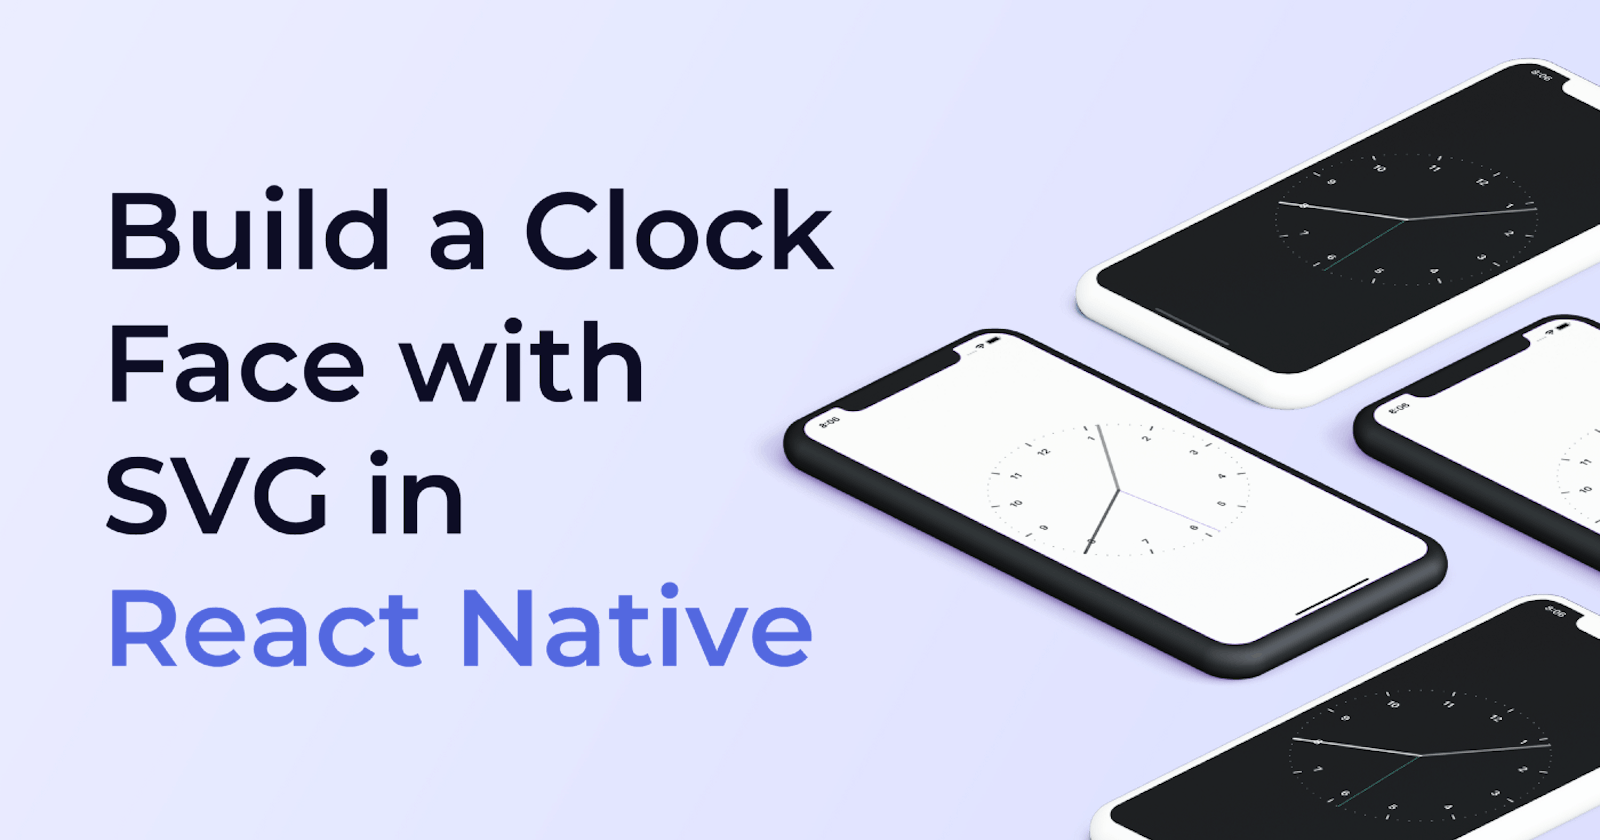 Build a Clock Face with SVG in React Native